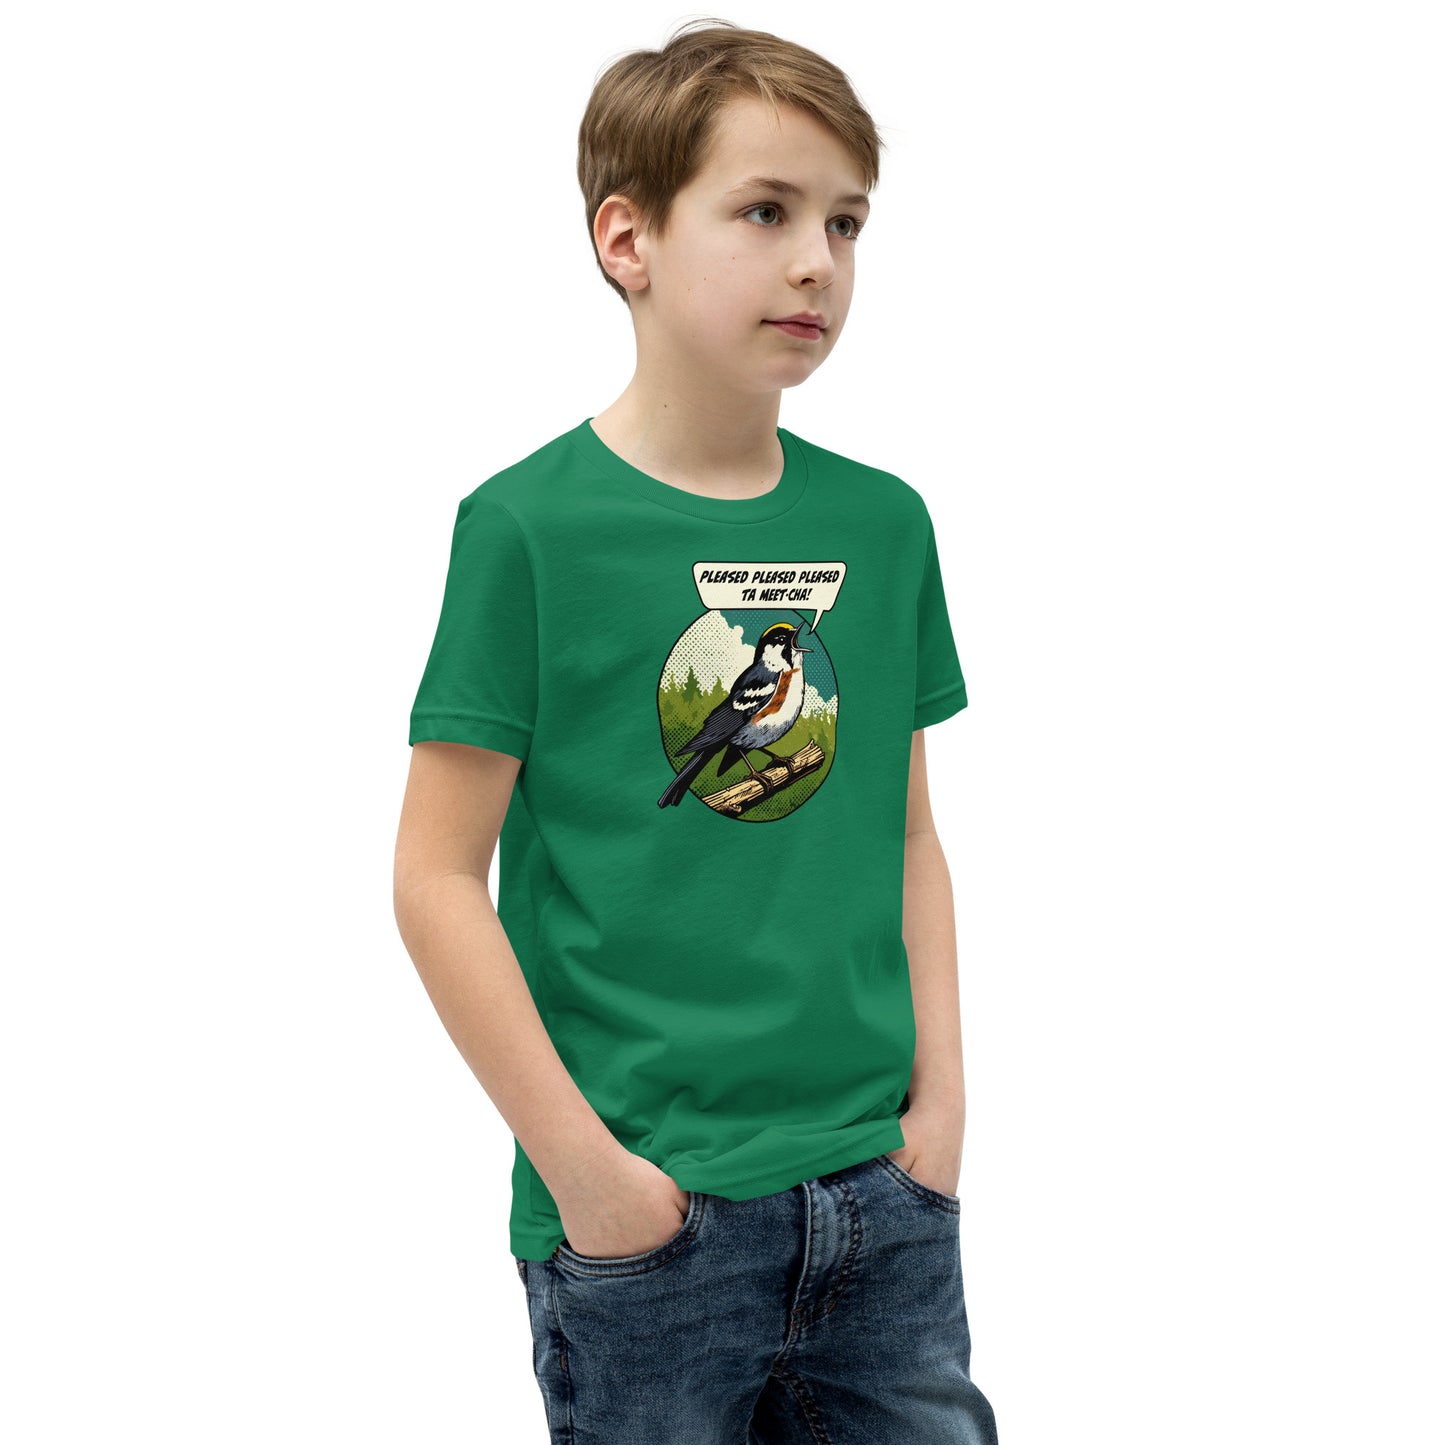 Chestnut-Sided Warbler Youth Short Sleeve T-Shirt